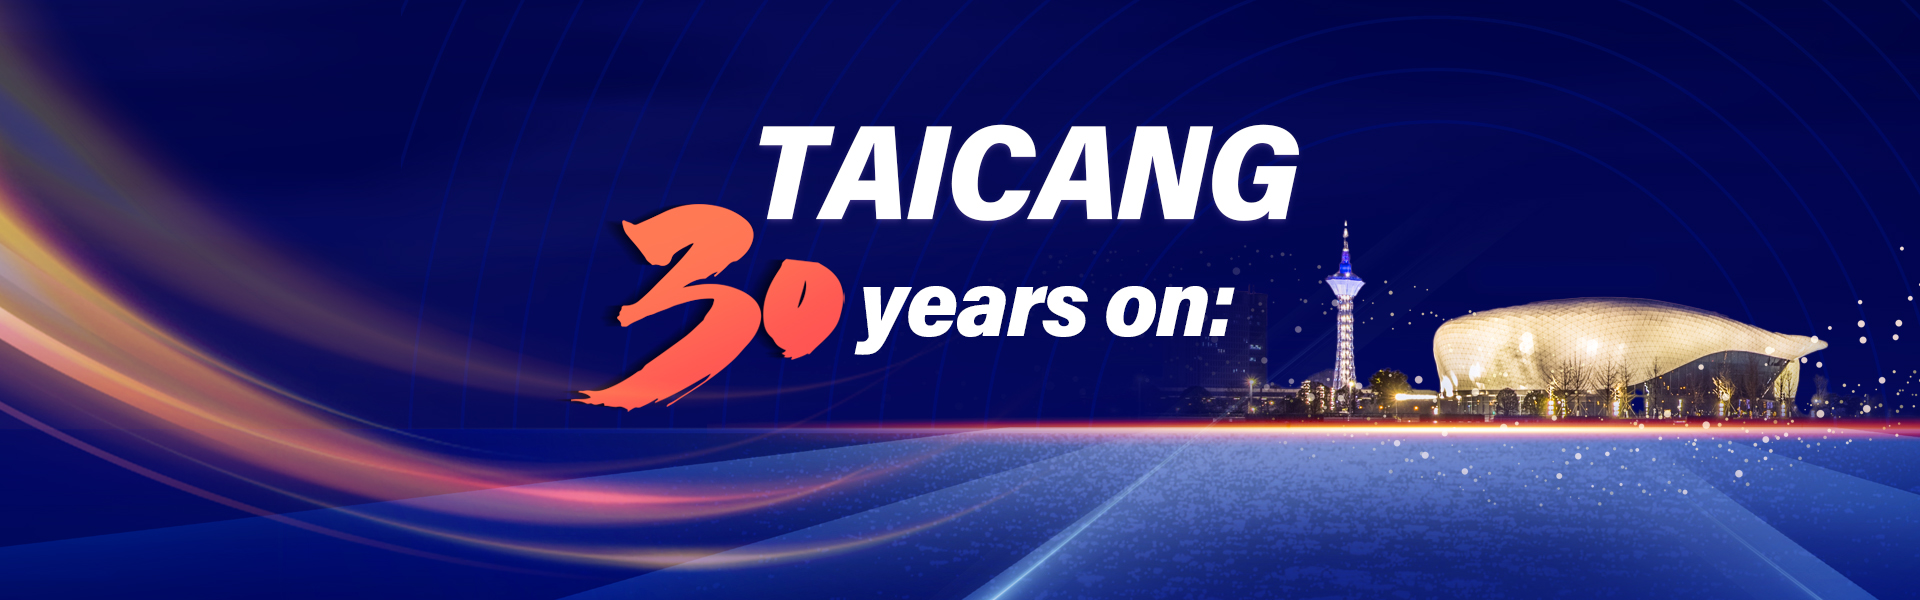 Taicang 30 years on: Abundant achievements and bright prospects